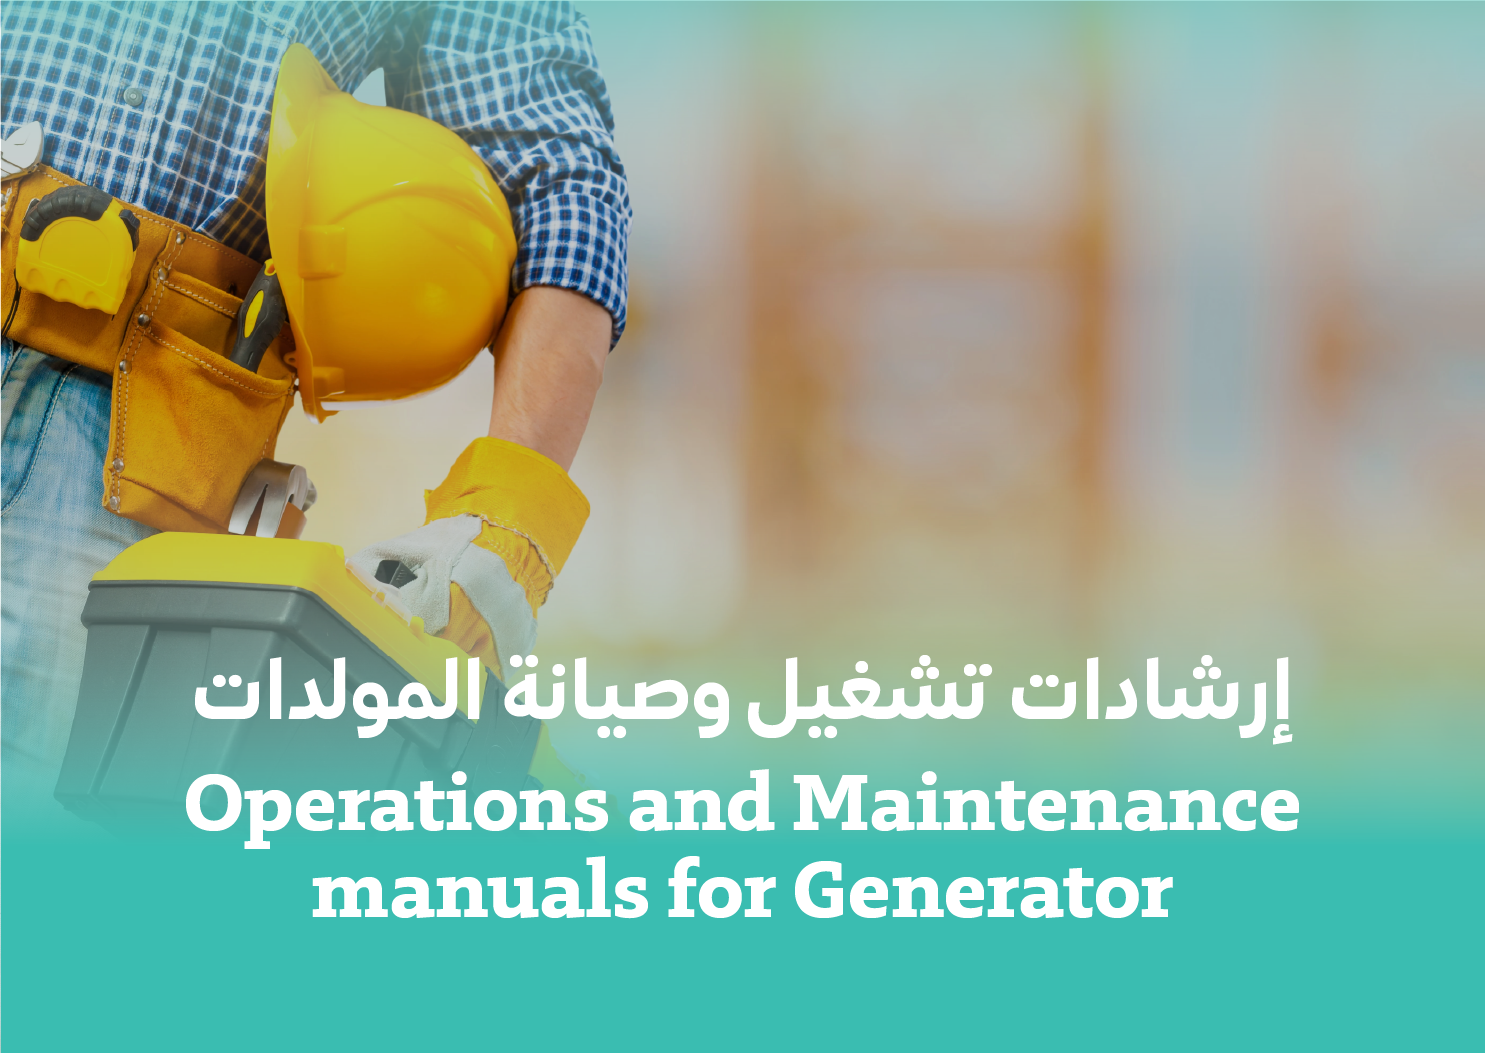 Operations and Maintenance Manuals for Generator